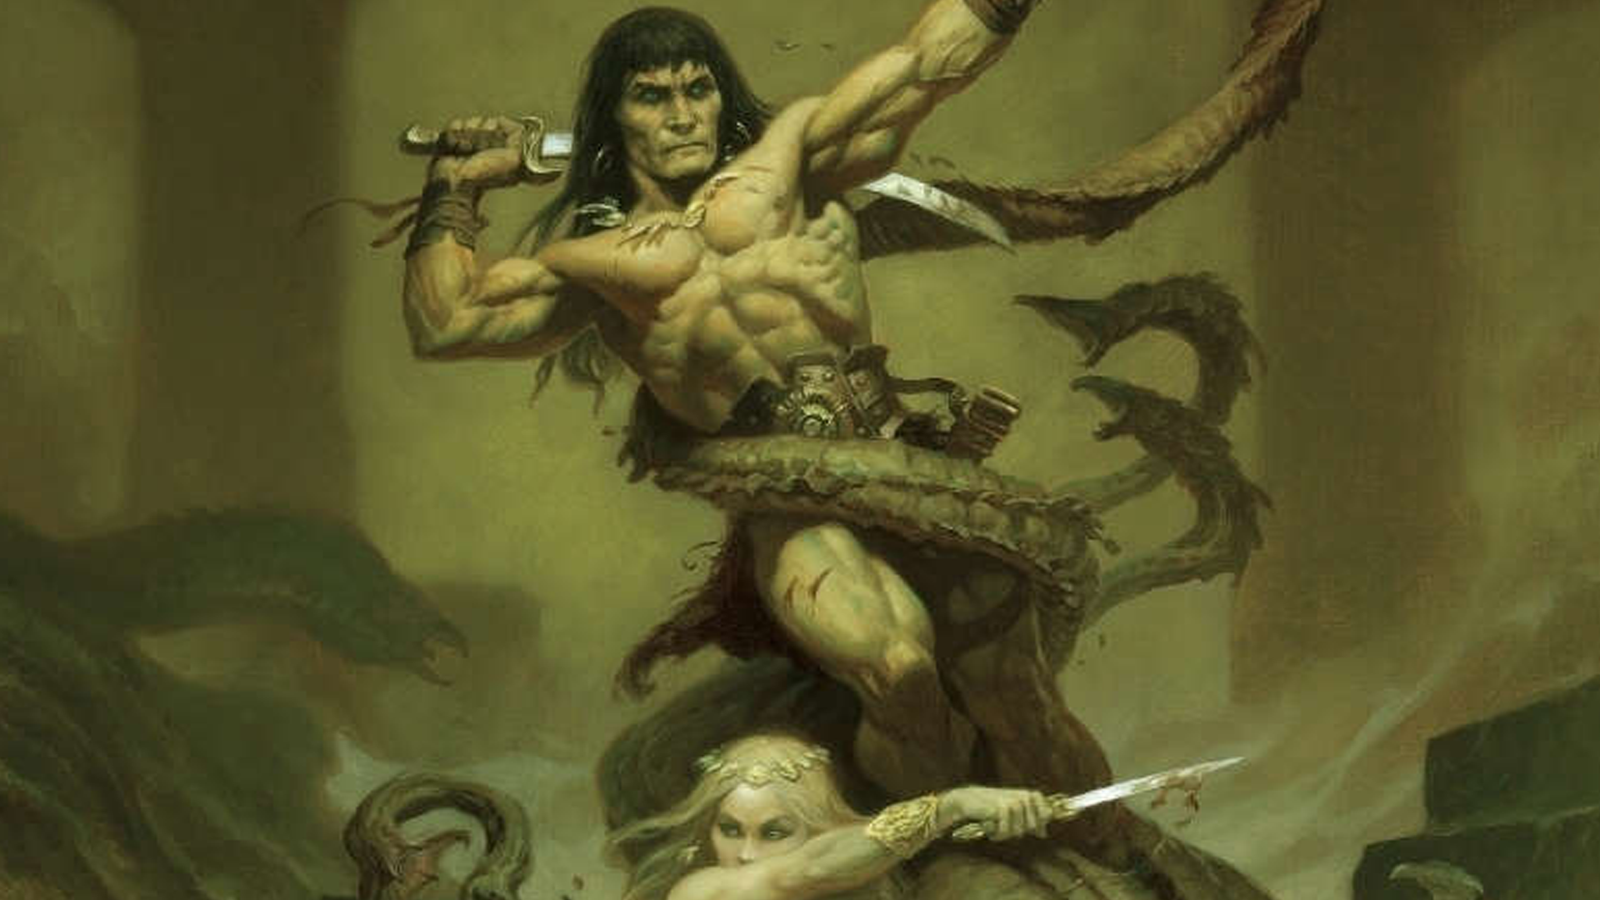 Grab the Conan RPG Player's Guide and character sheets for under